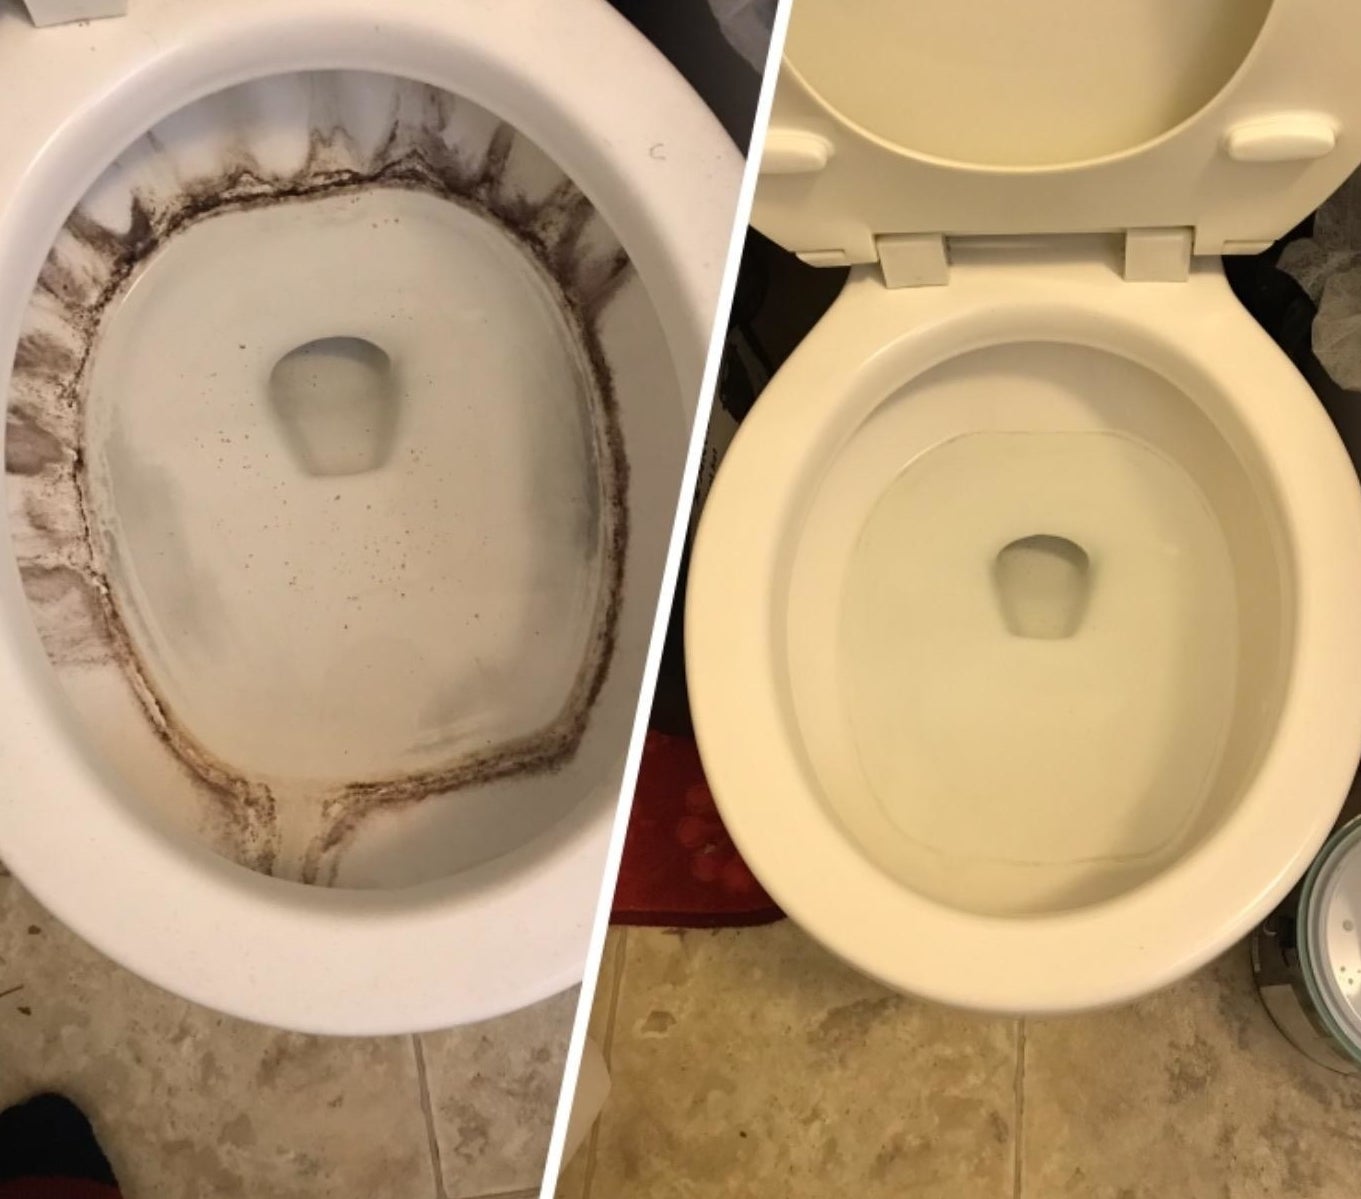 reviewer&#x27;s photo of a toilet with brown stains in it compared to the after photo of it looking clean, white, and stain-free